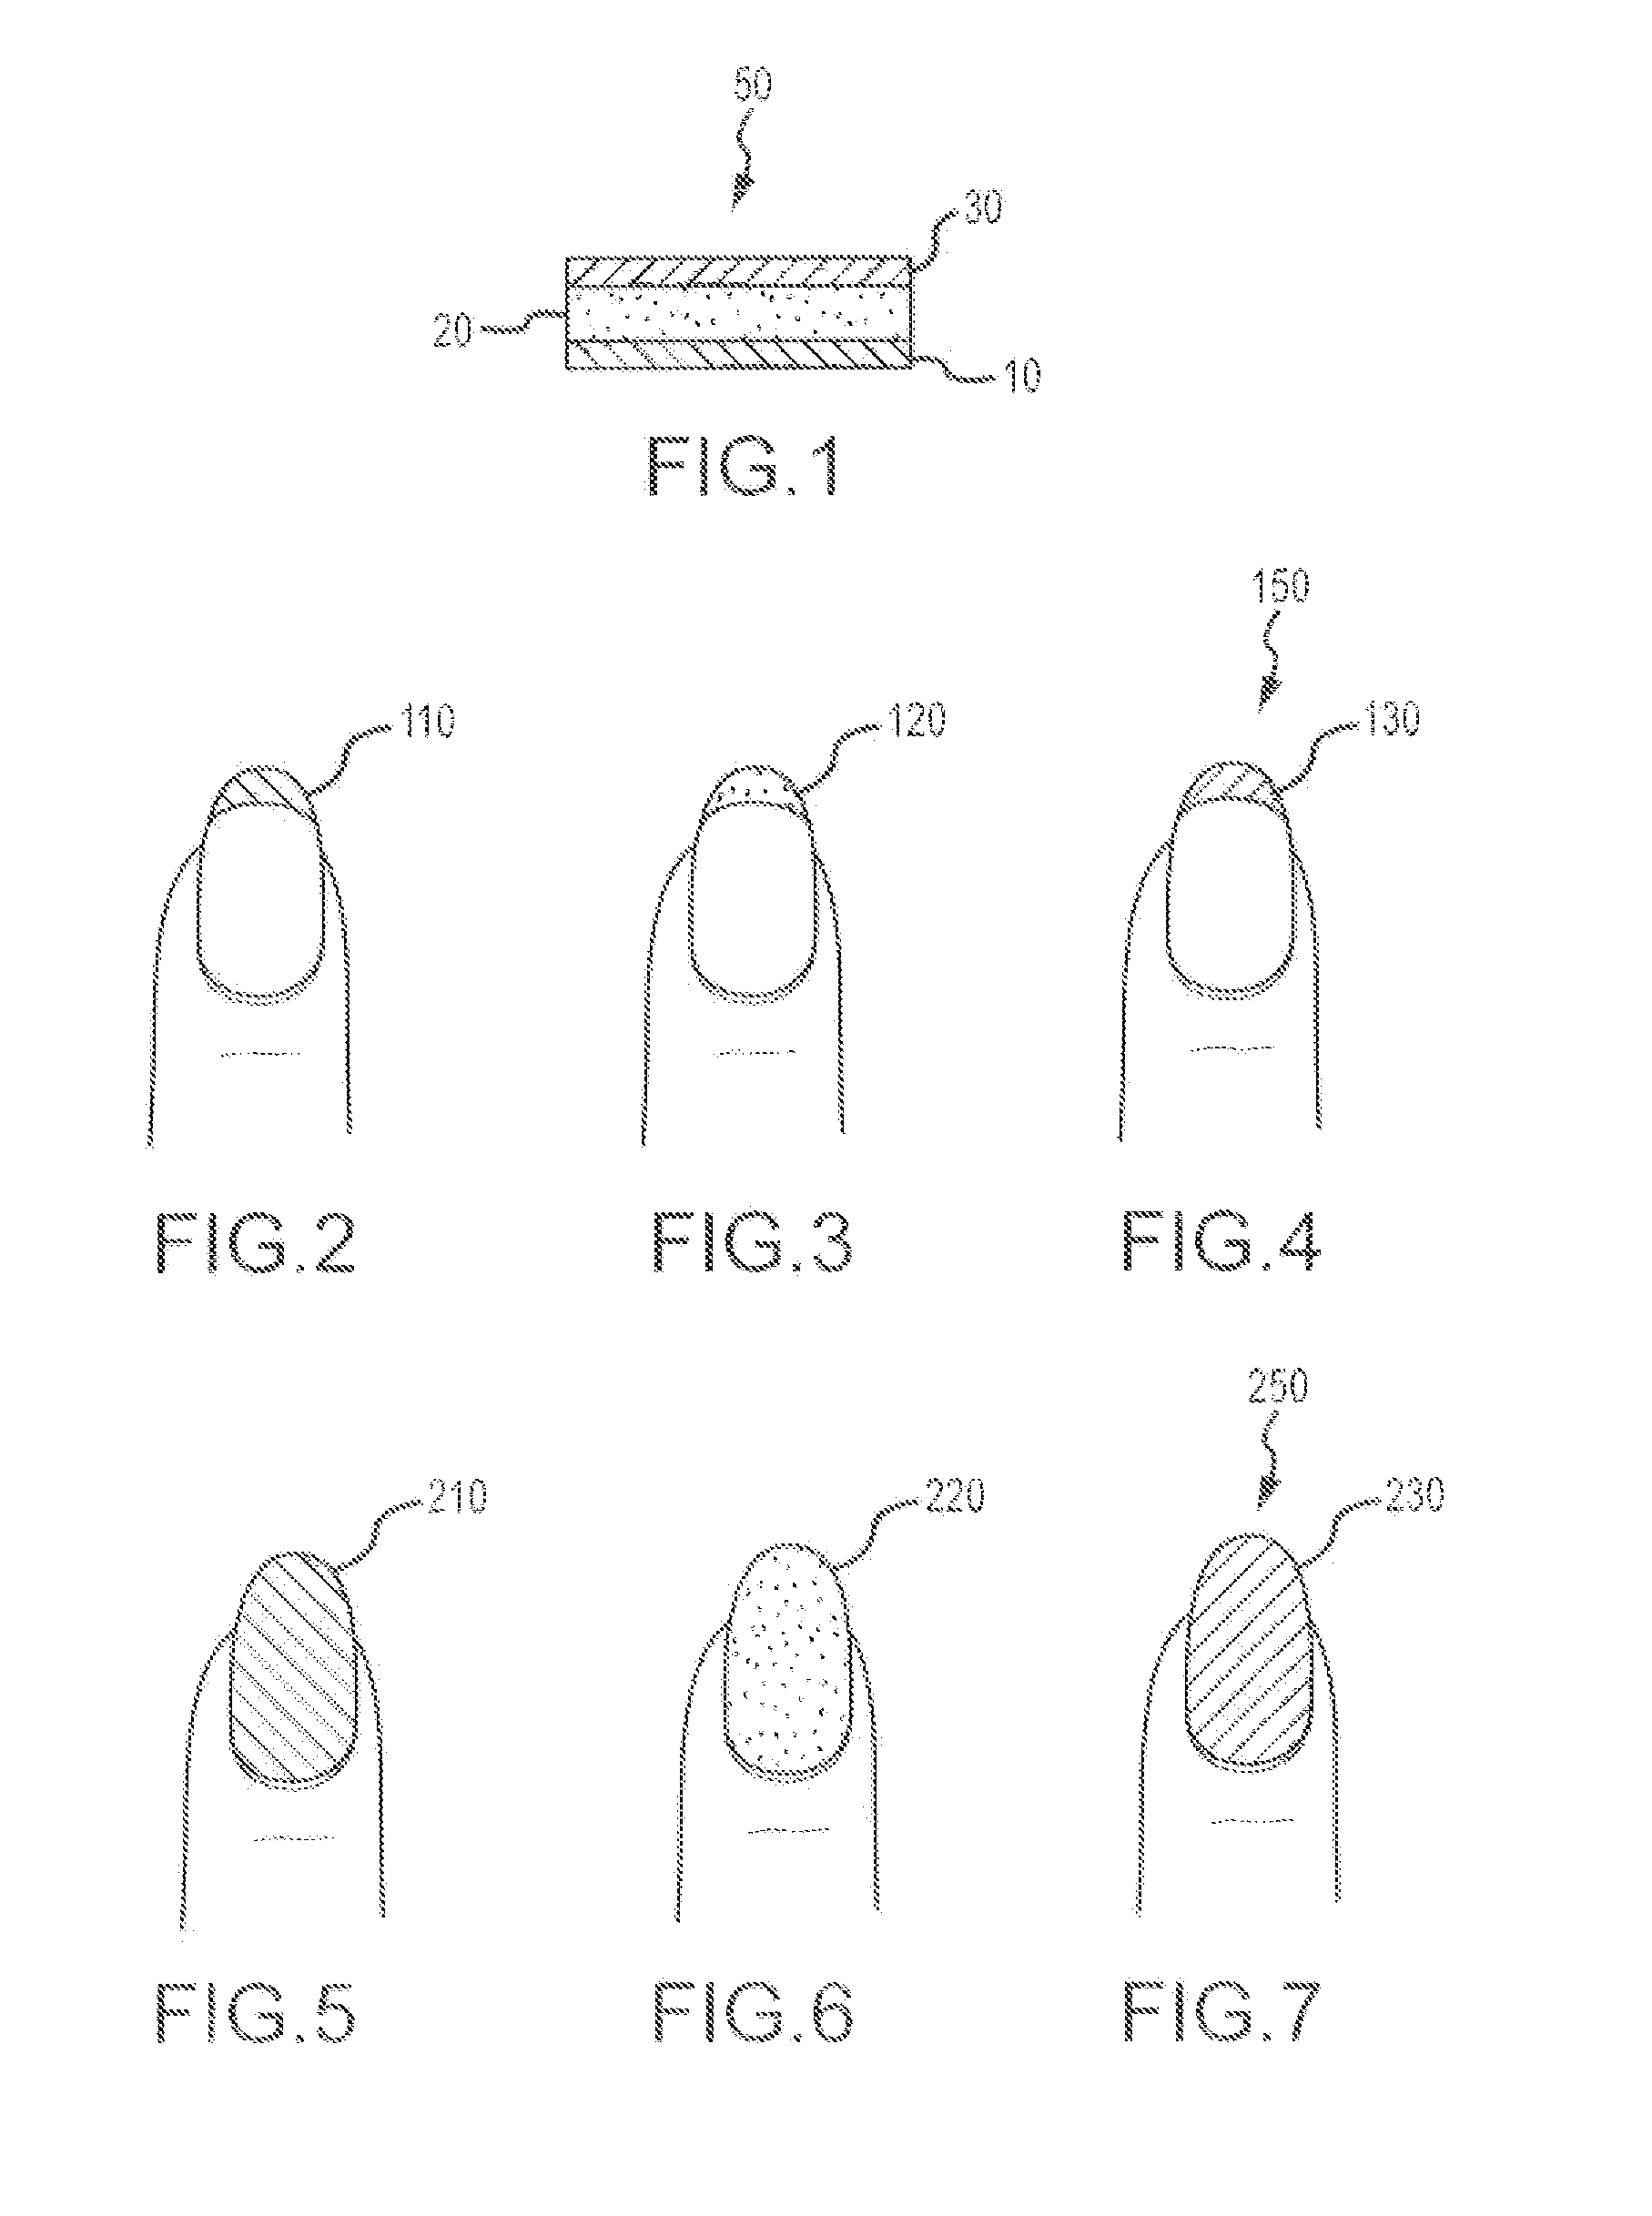 Fingernail System for Use with Capacitive Touchscreens